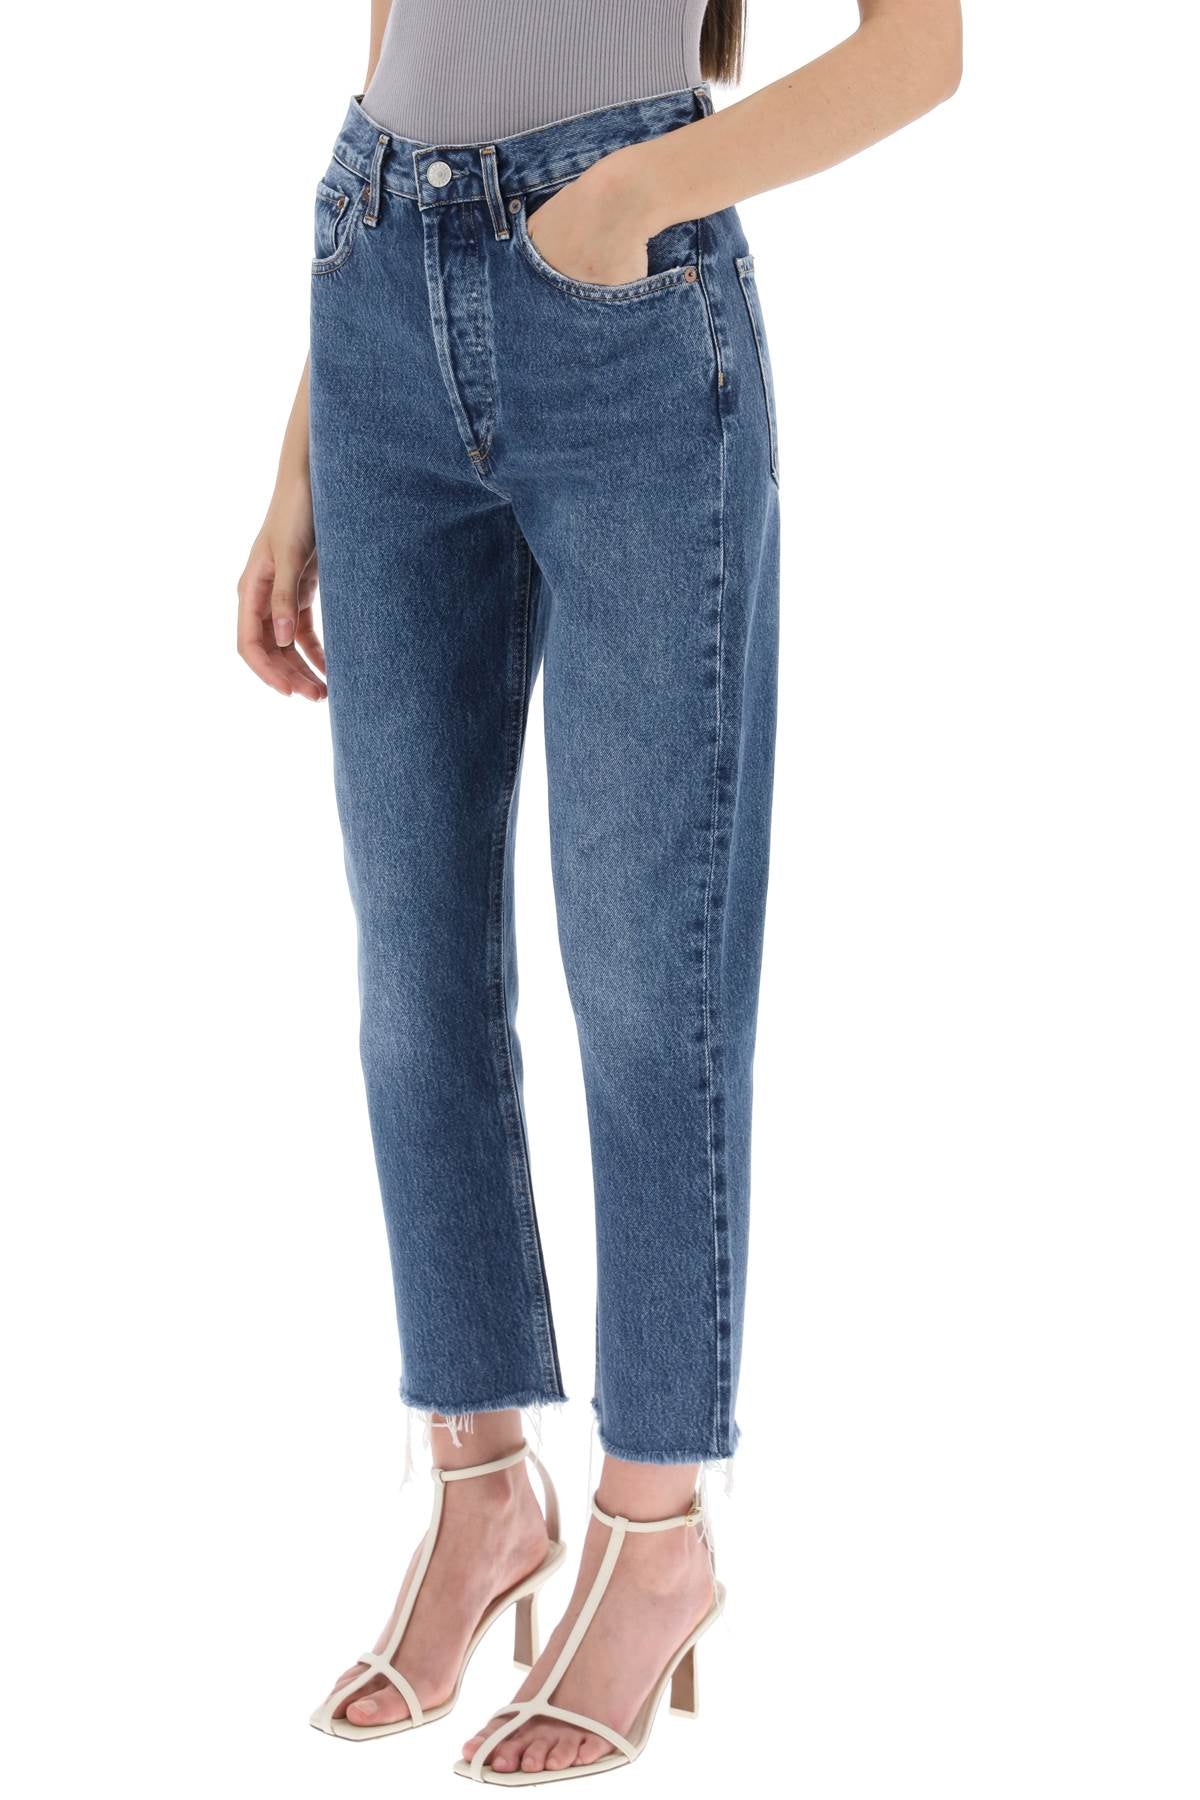 Agolde riley cropped jeans-3